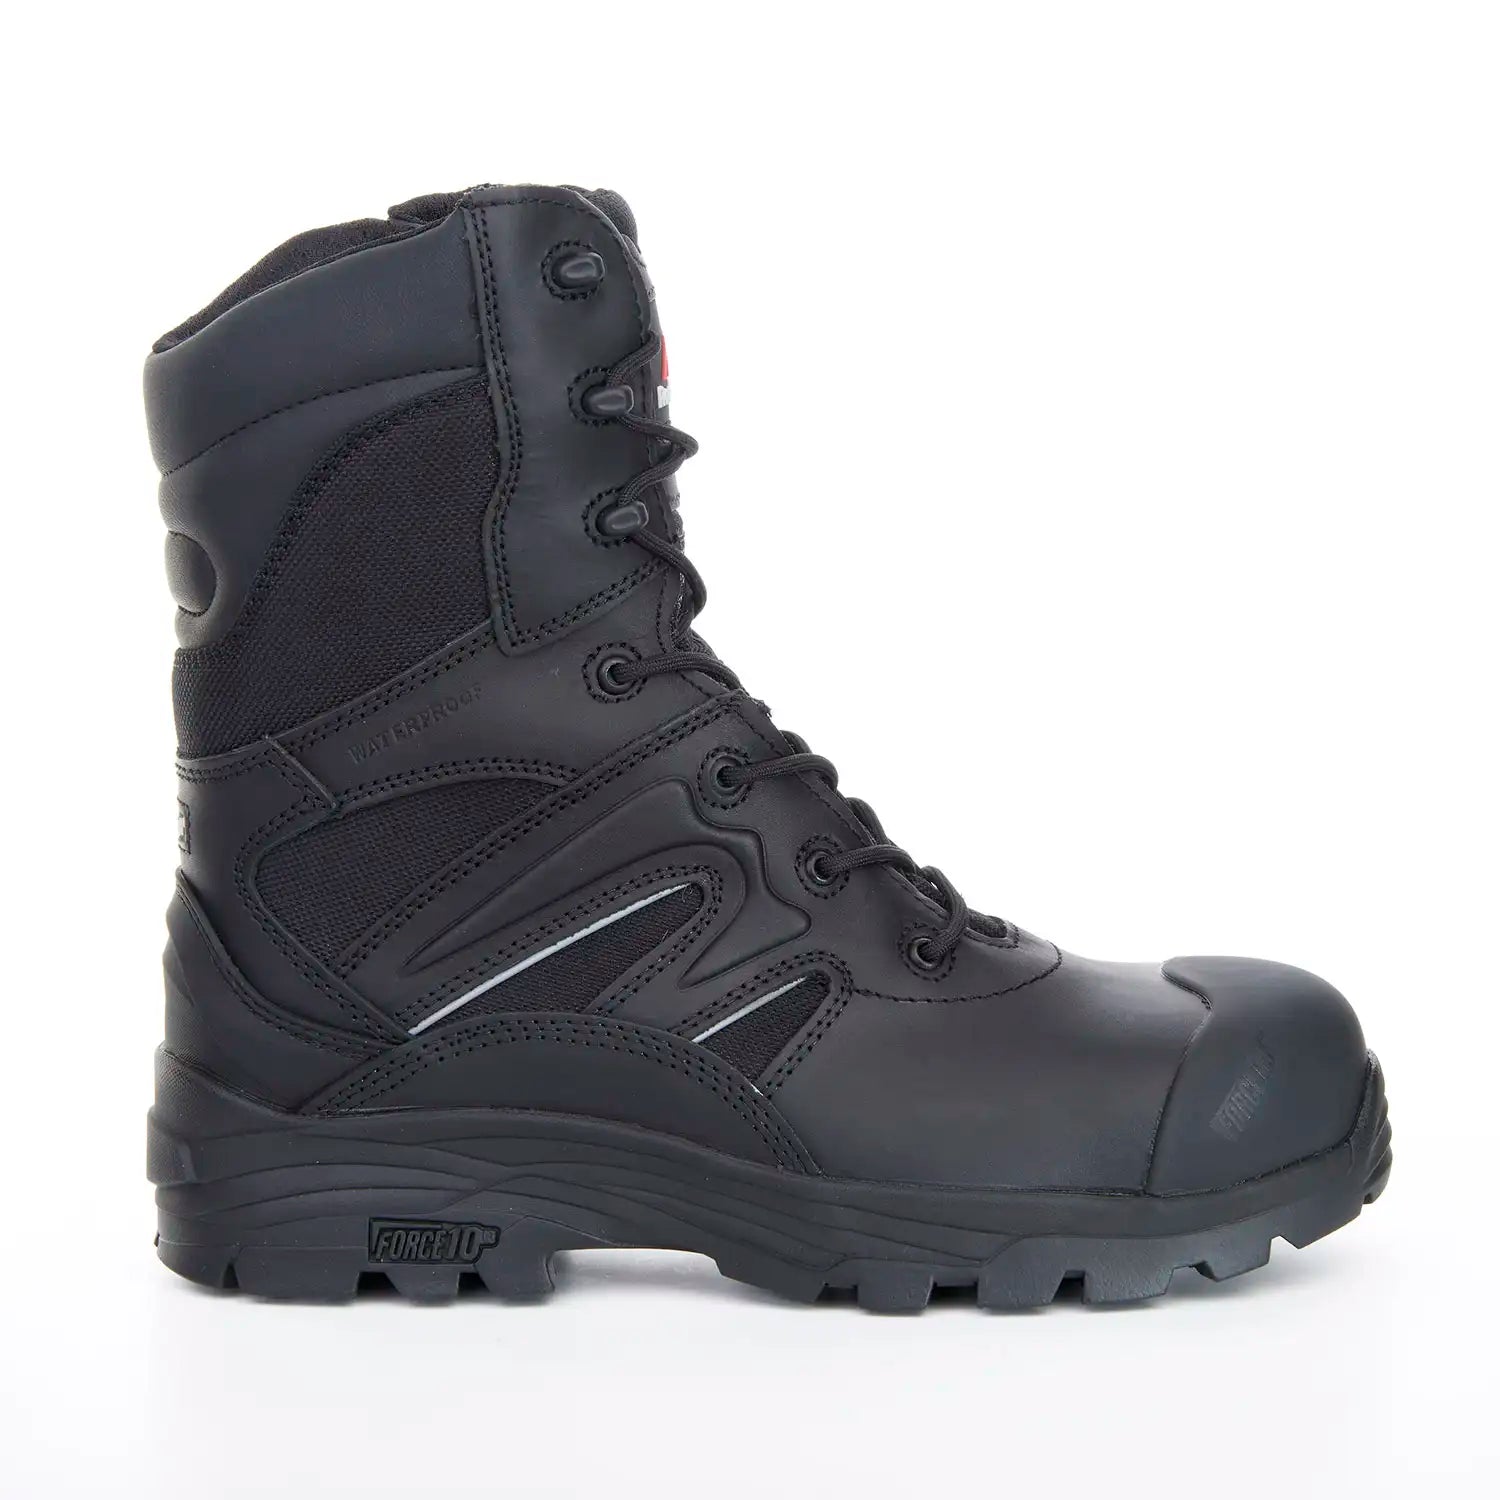 Rock Fall RF4500 Titanium High Leg Waterproof Safety Boots with Side